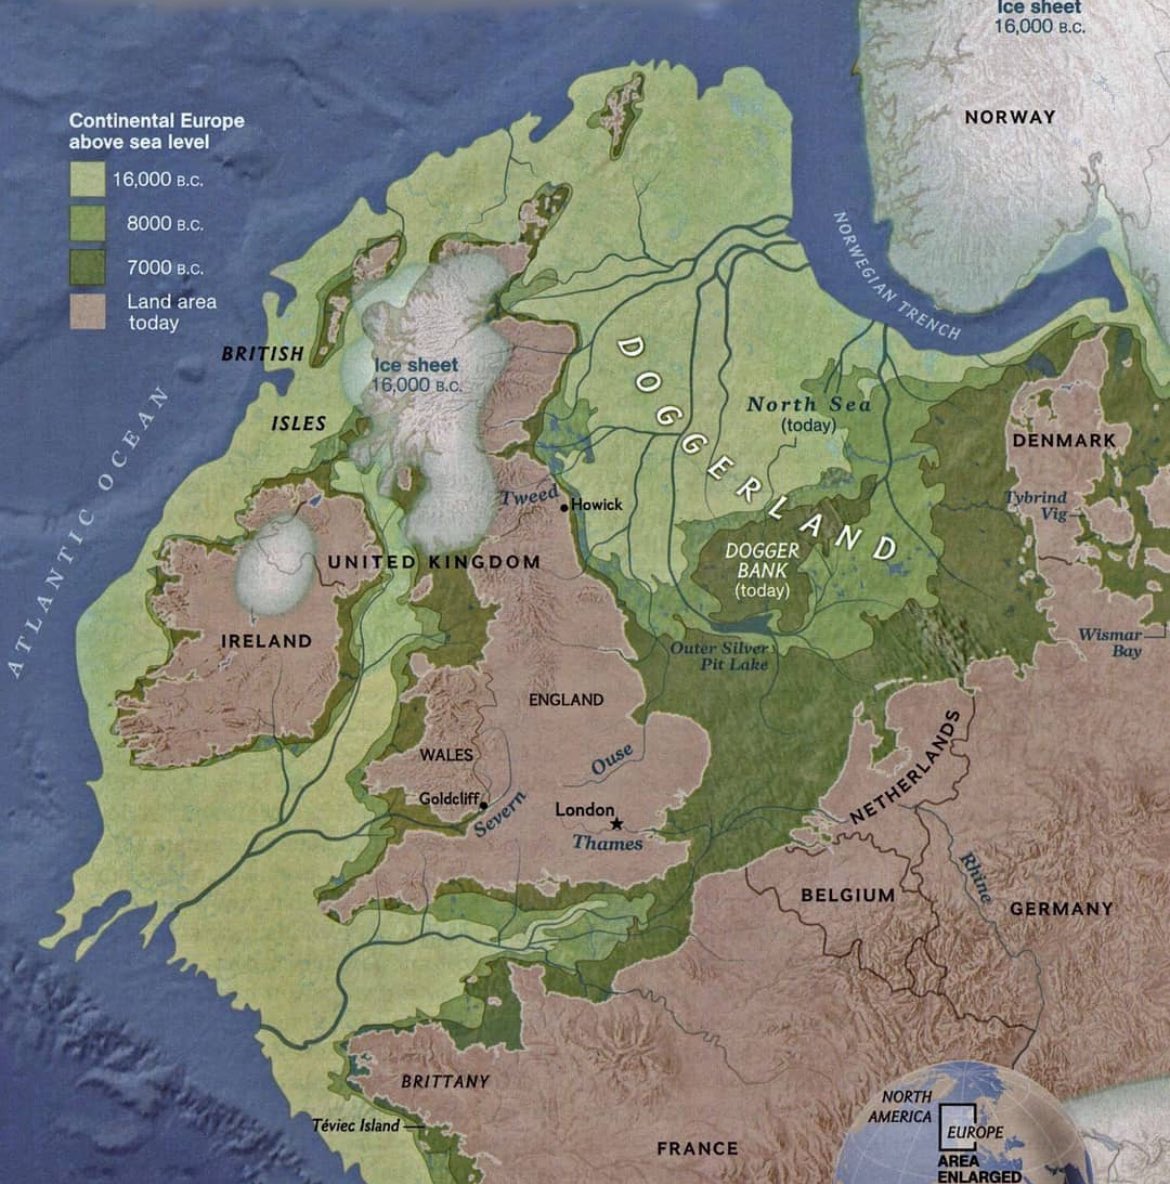 Just 9,000 years ago Britain was connected to continental Europe by an area of land called Doggerland, which is now submerged beneath the southern North Sea. Doggerland was a mix of marshes, swamps, wooded valleys and hills, and most likely inhabited by humans during the